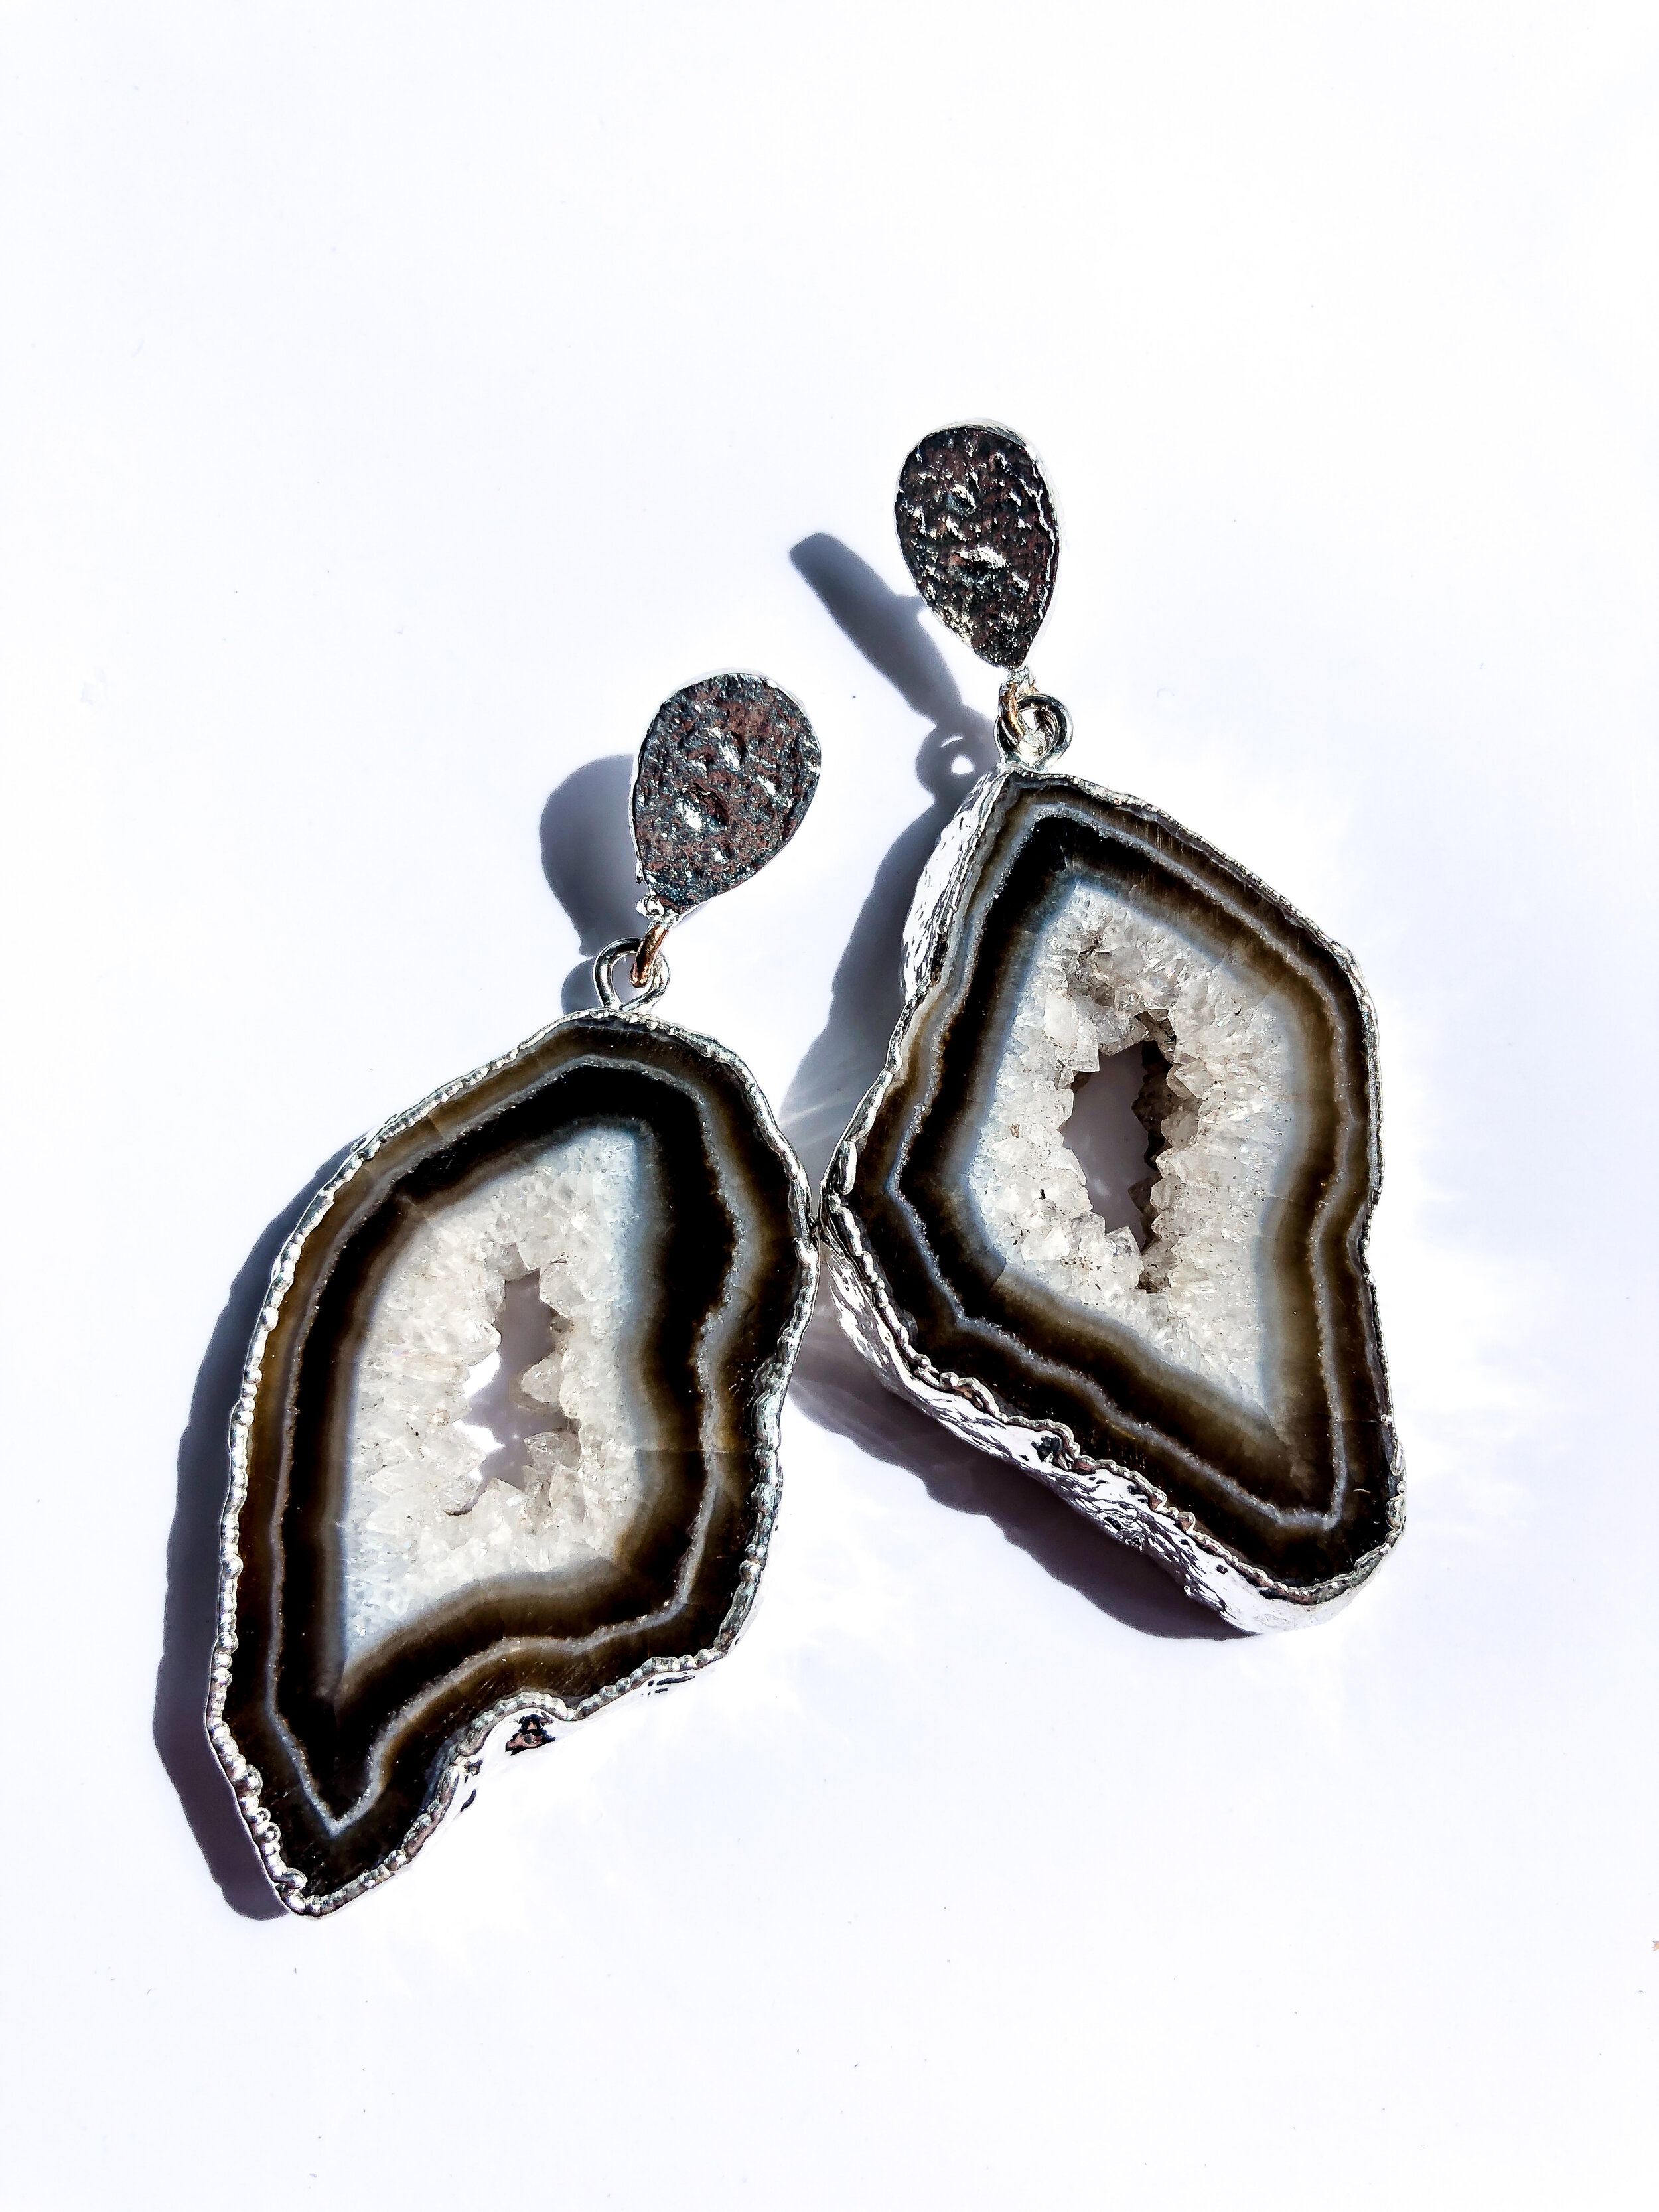 Black Agate Slice Earrings Gold Jewelry CC13 Healing Crystals And Stones 